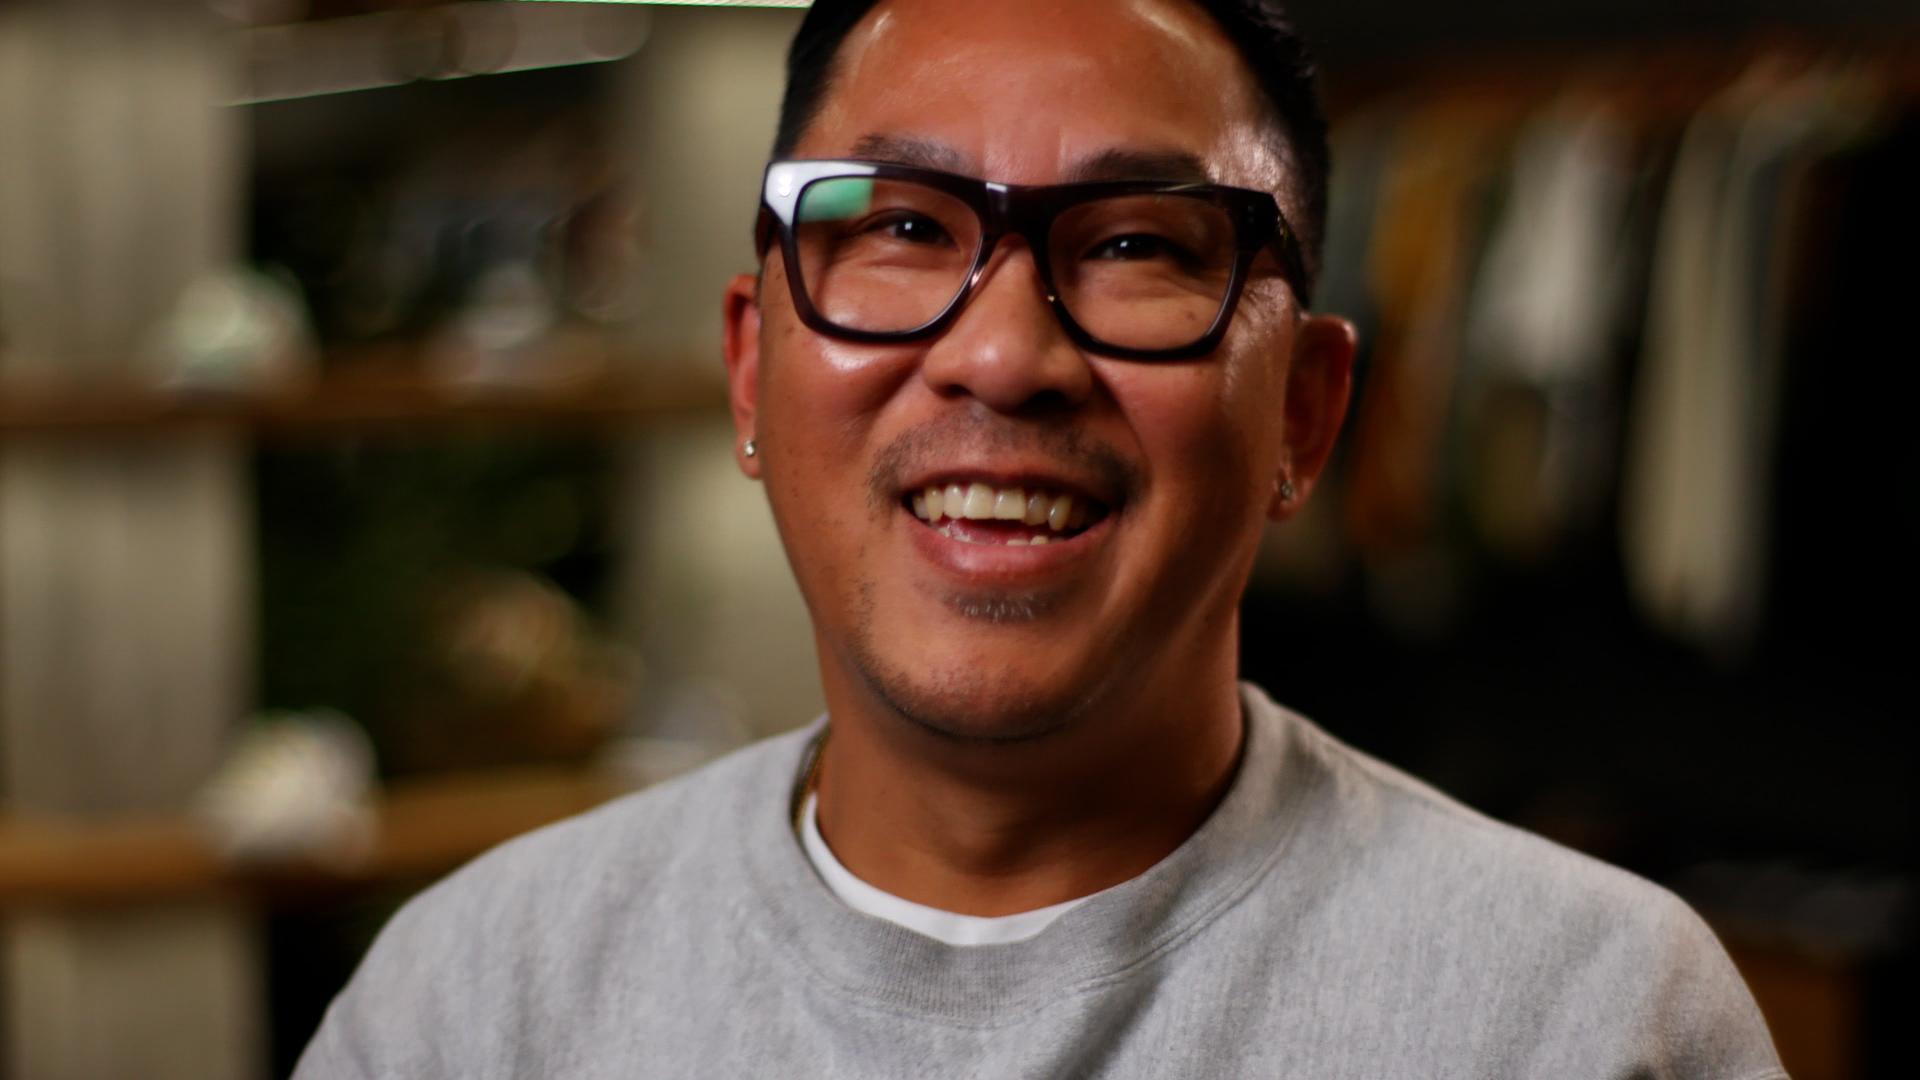 A man wearing thick black rimmed glasses laughs towards the camera.